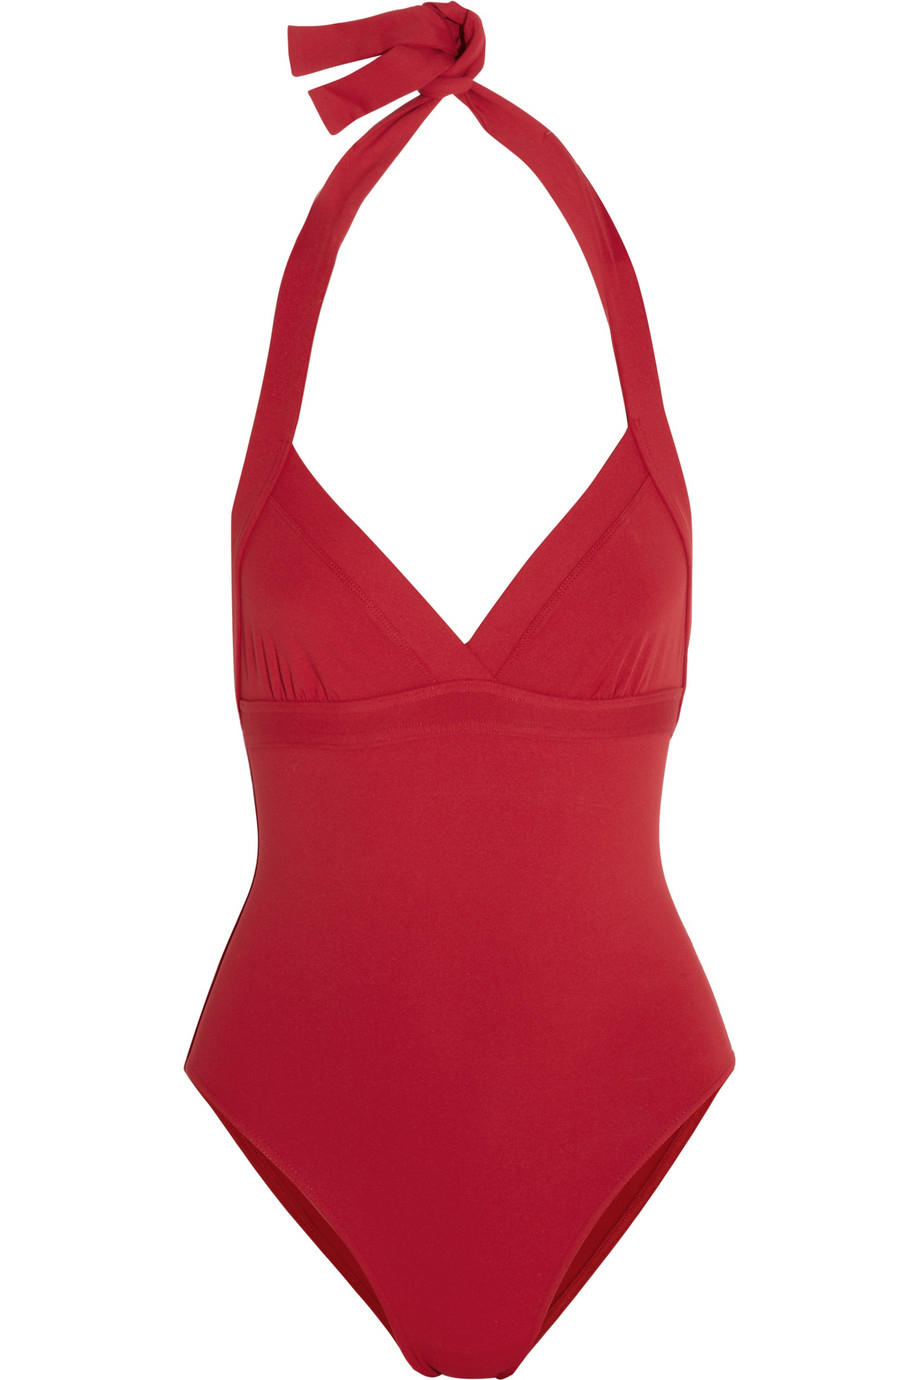 Lyst - Eres Les Essentiels Cassis Halterneck Swimsuit in Red